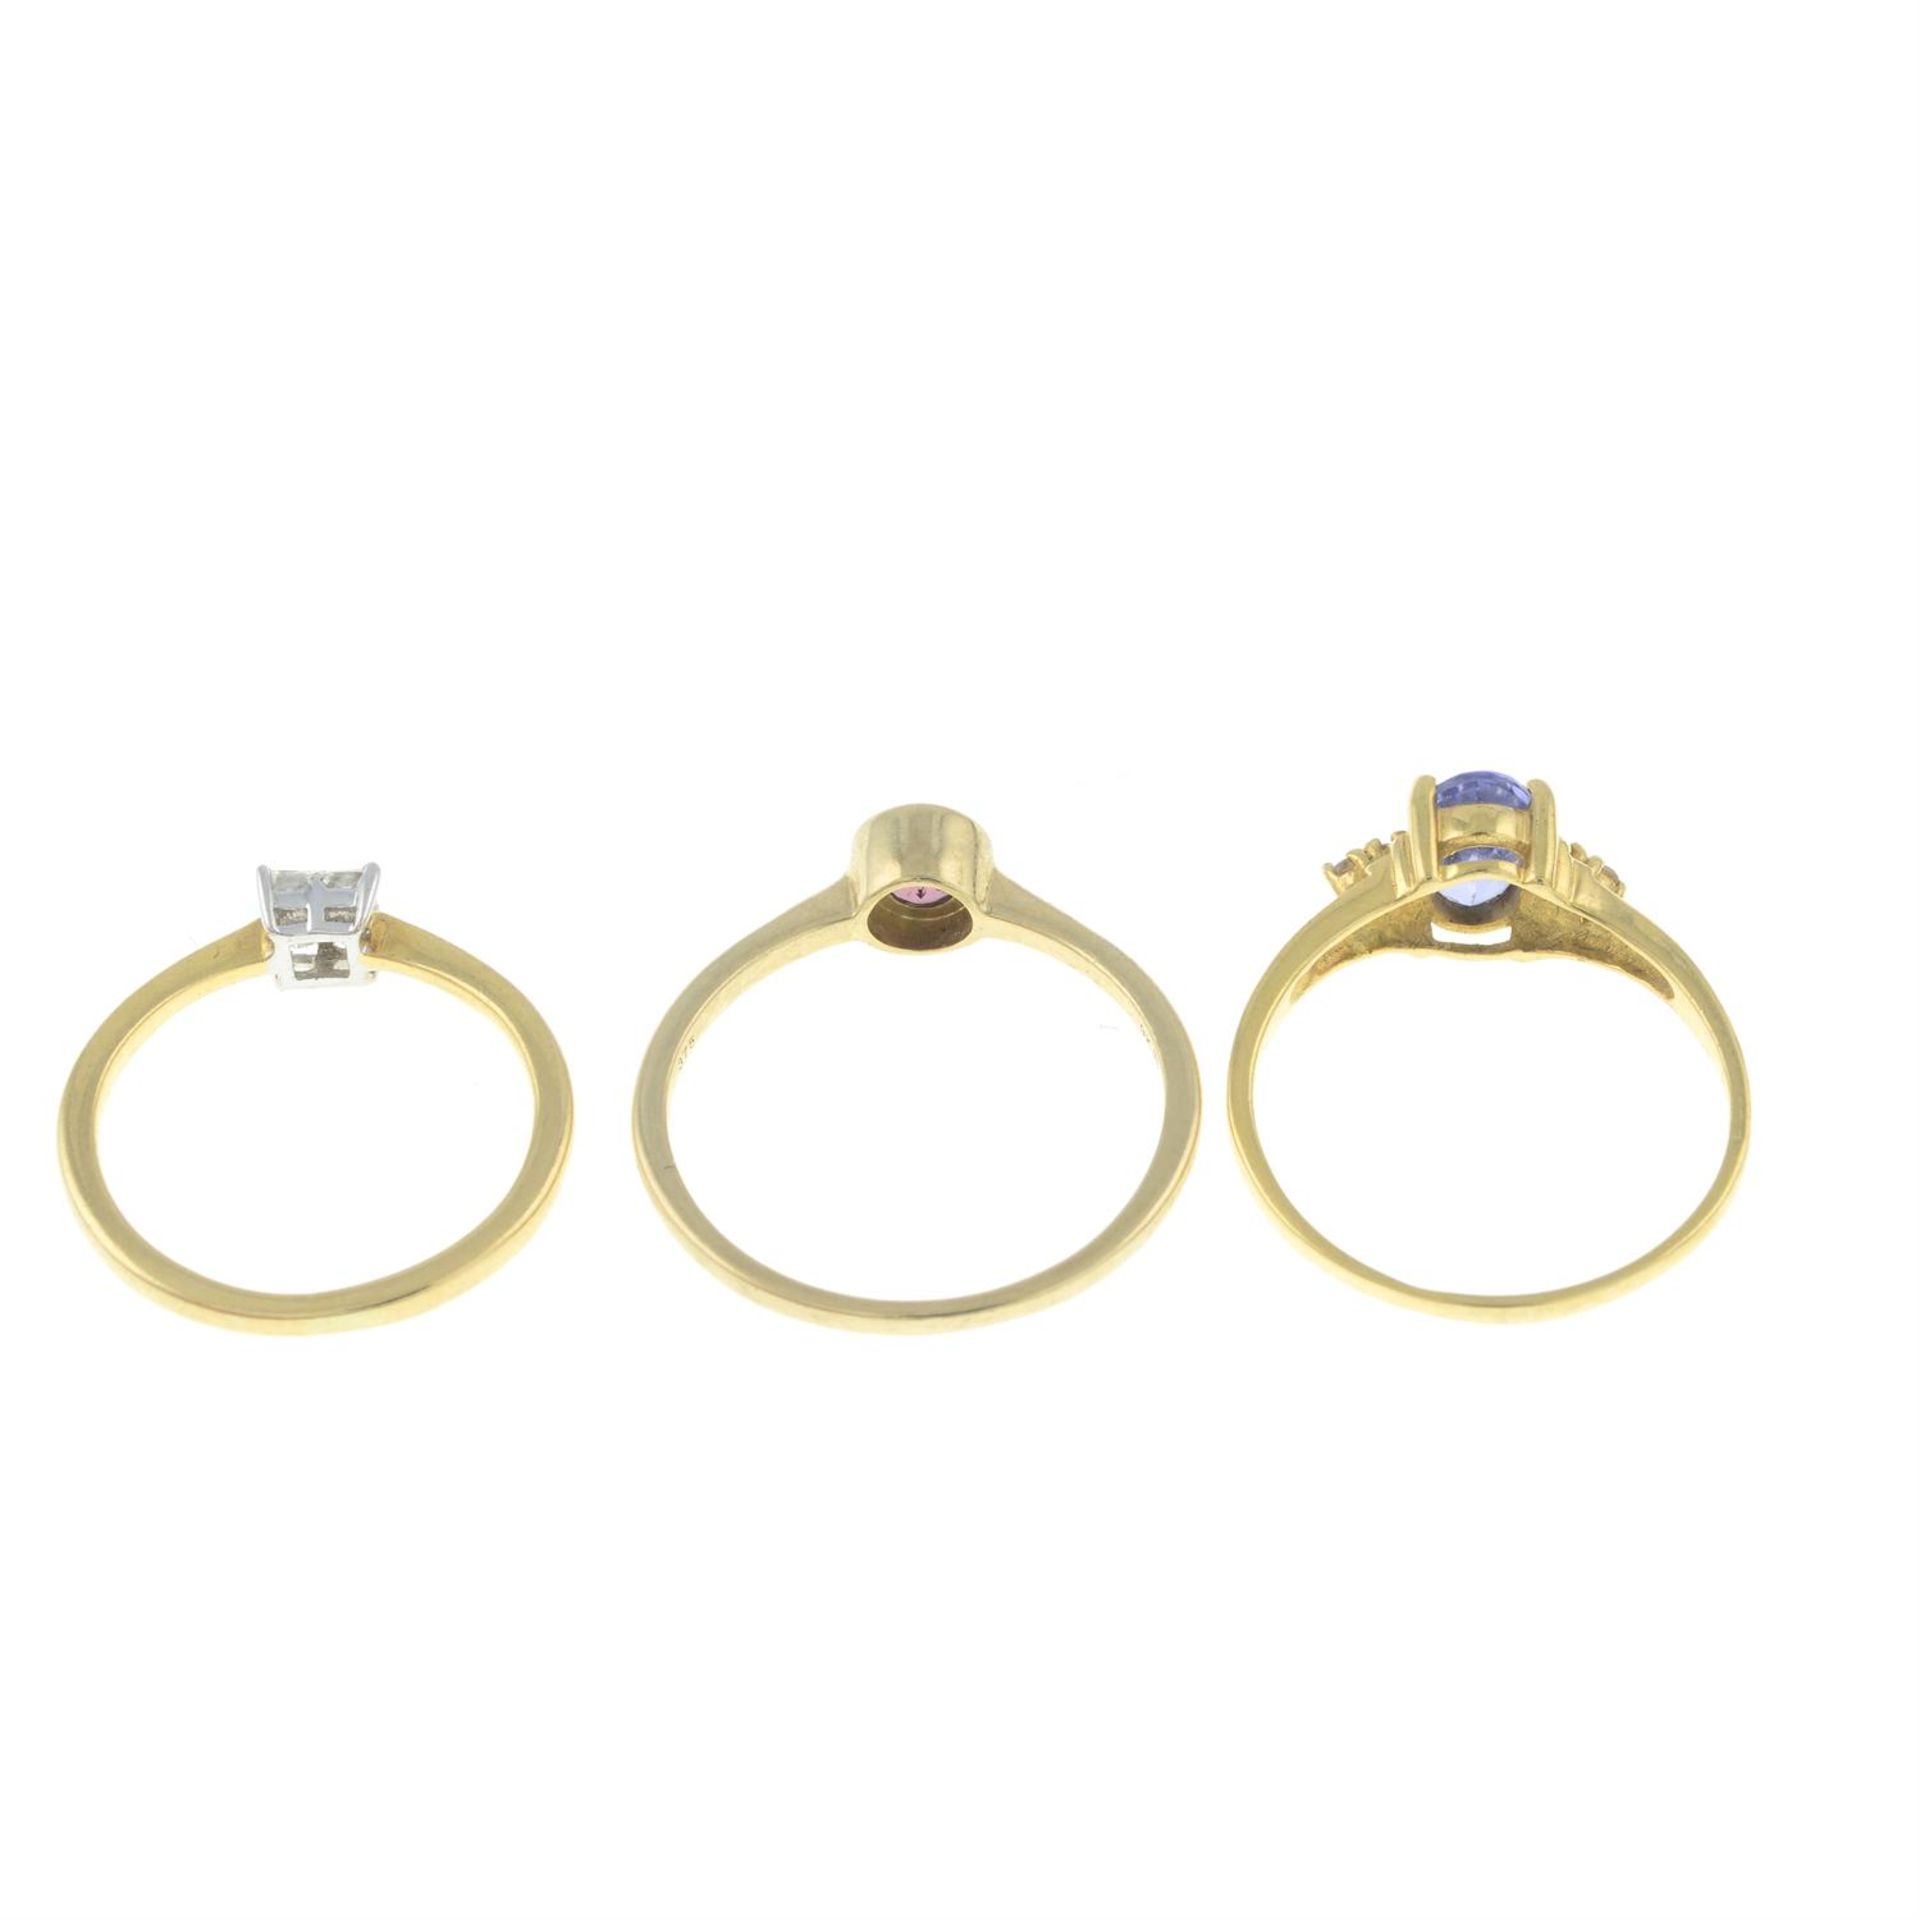 An 18ct gold diamond cluster ring, an 18ct gold tanzanite ring and a 9ct gold garnet ring. - Image 2 of 2